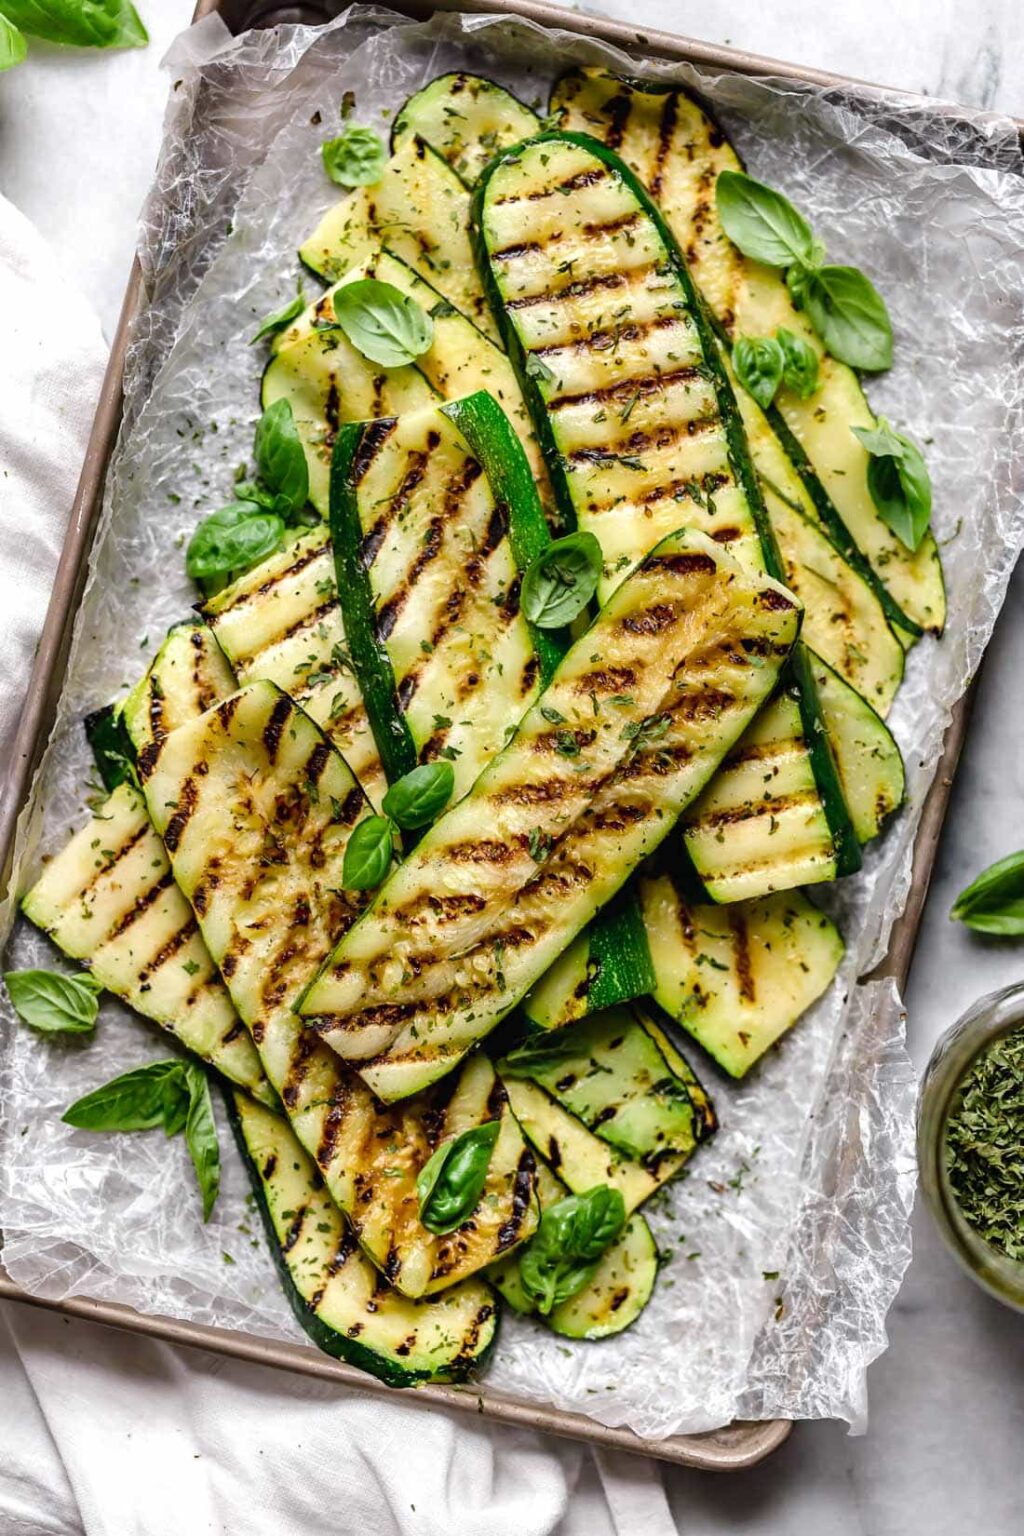 Perfectly Grilled Zucchini - Upgrade Your Grill